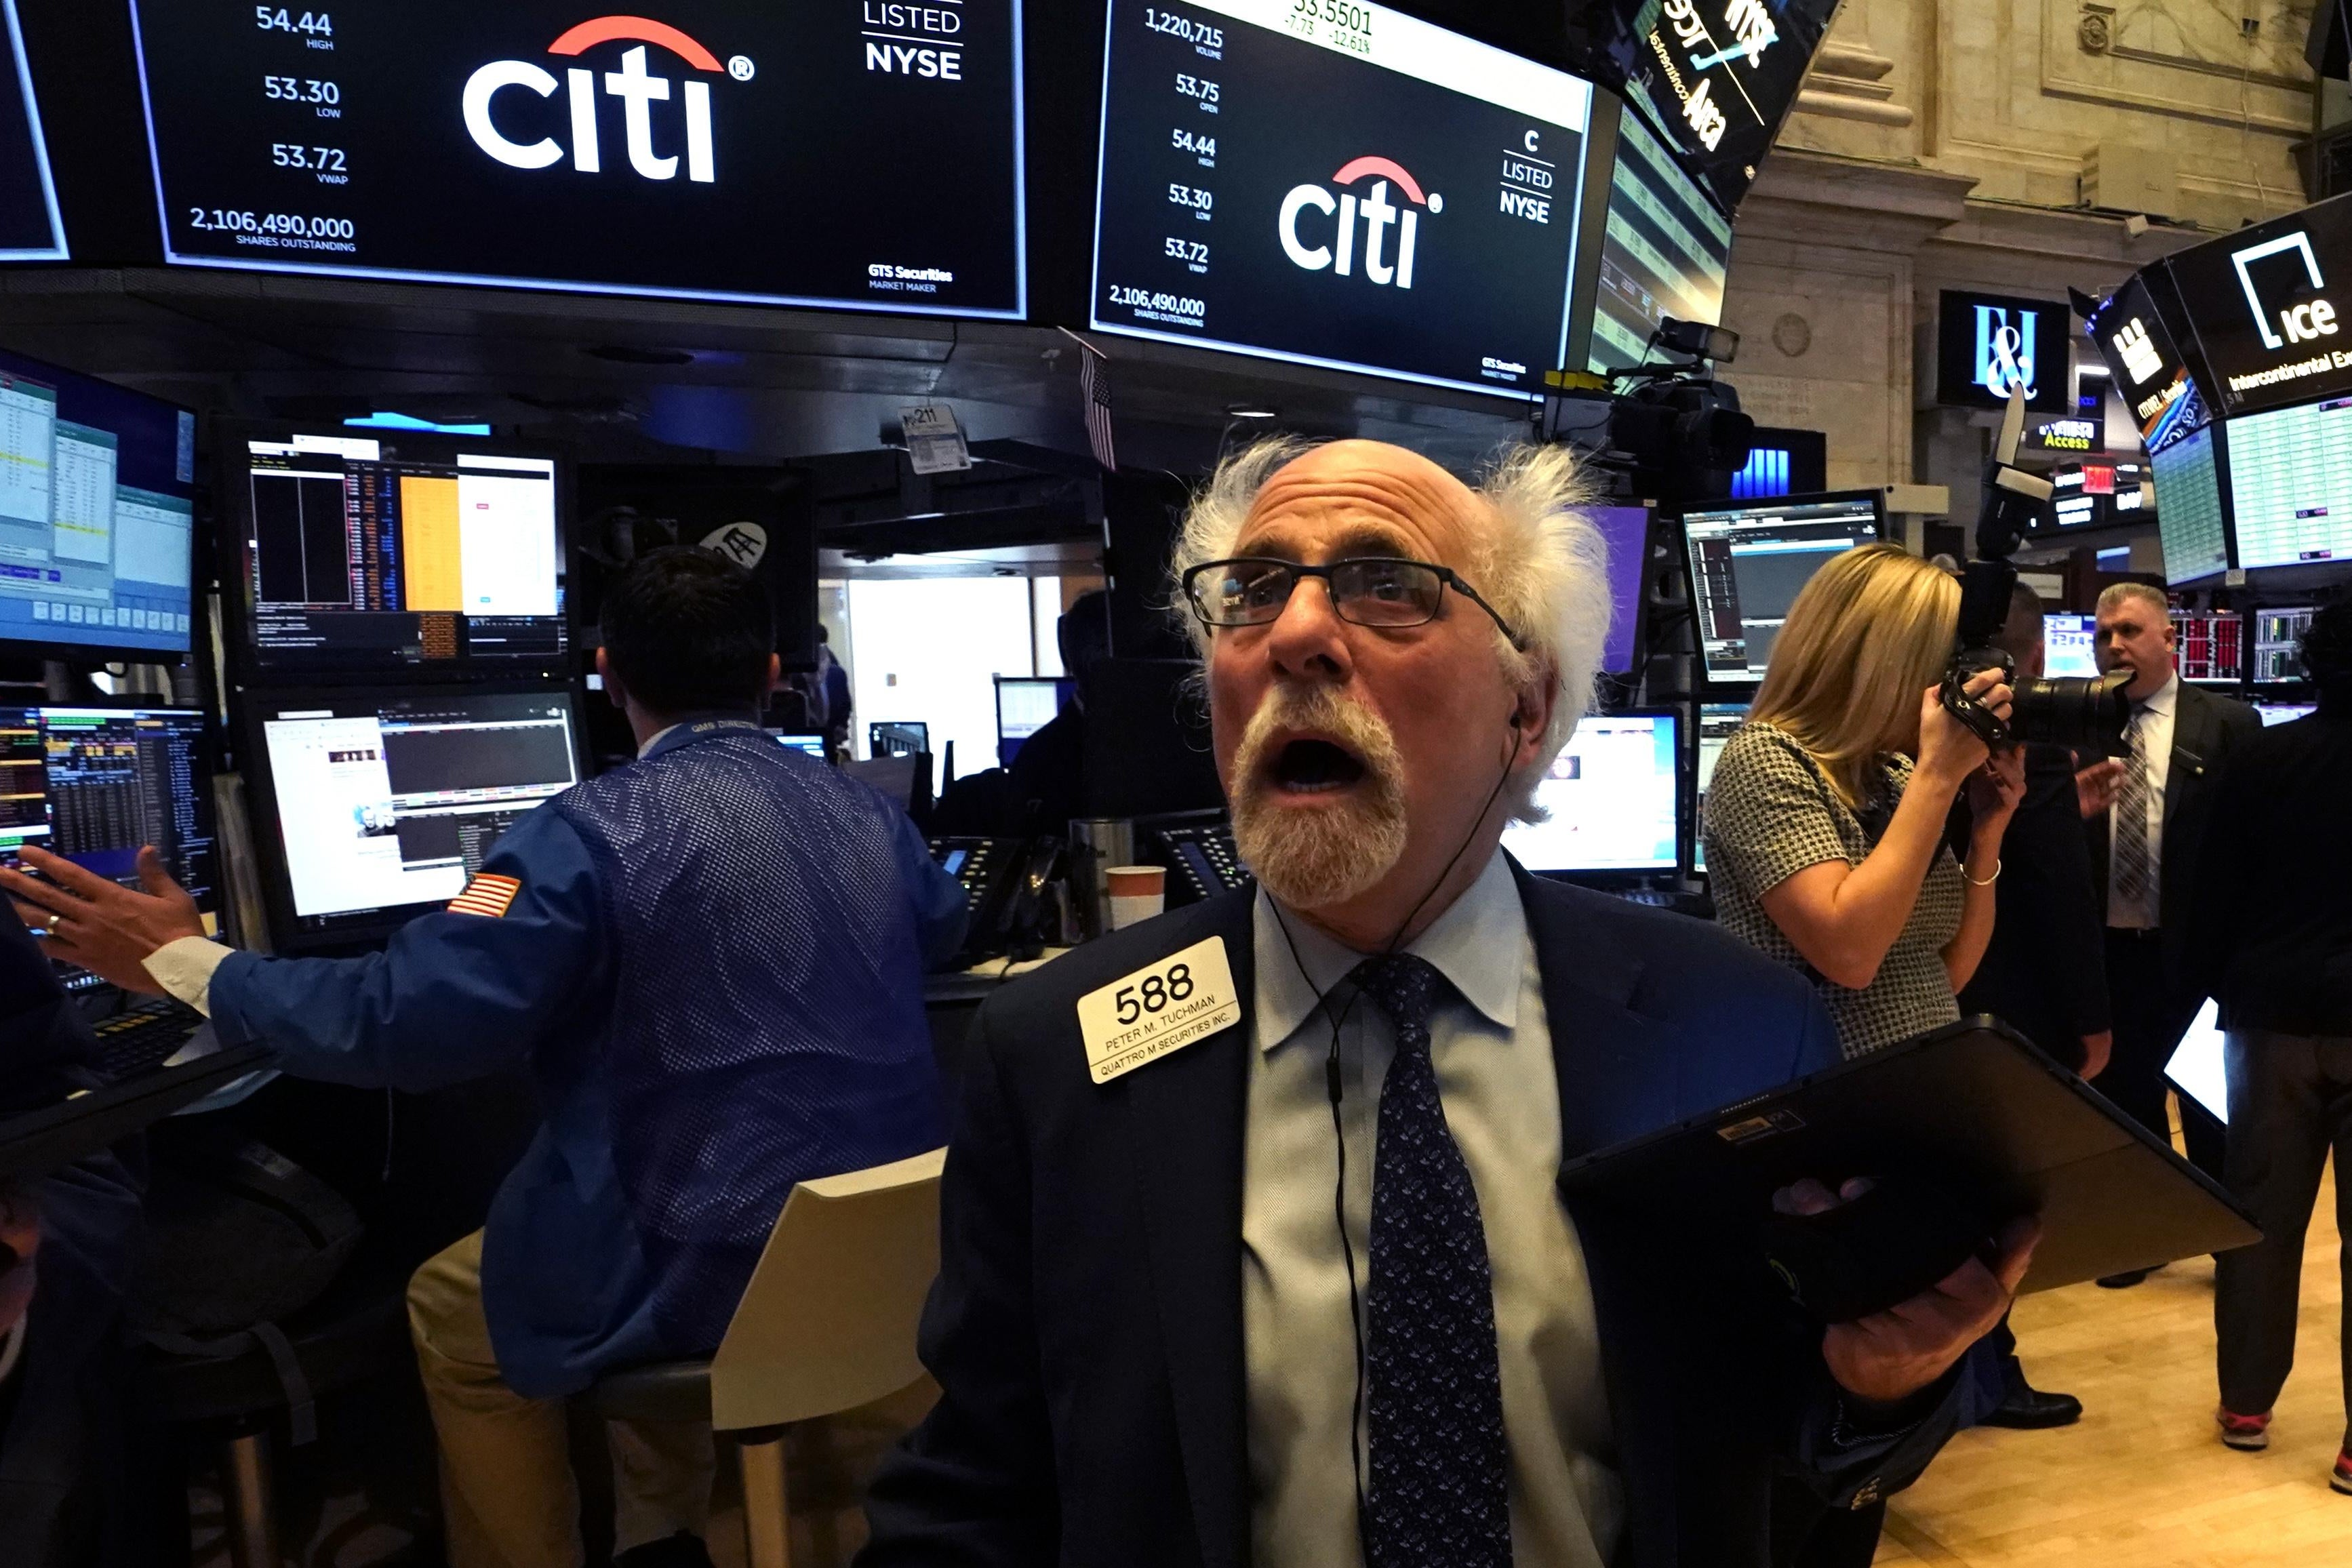 Peter Tuchman, floor trader, reacts as he works on the floor during the opening bell on the New York Stock Exchange on March 9, 2020 in New York. He has a bald head and side hair puffs and his mouth is wide open. He is freaking out.